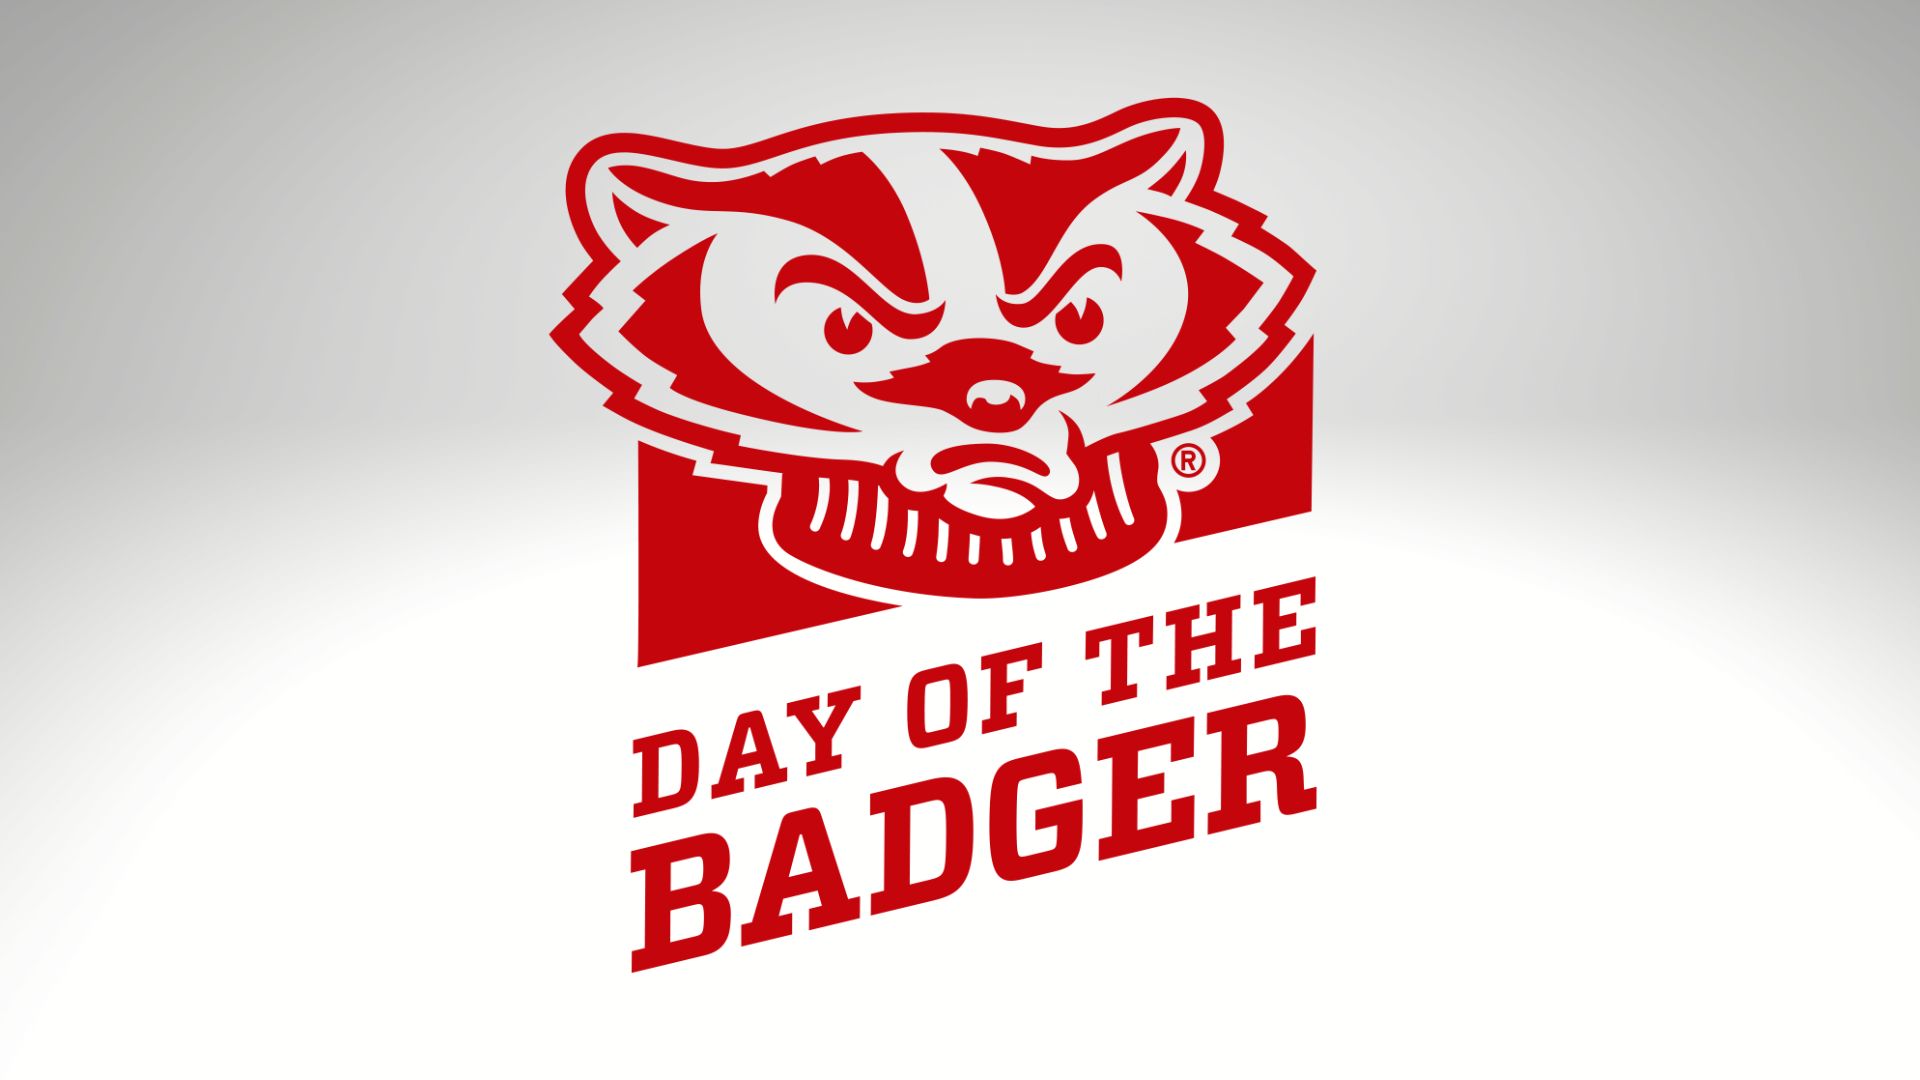 Day of the Badger 1848 Minutes of Giving College of Engineering